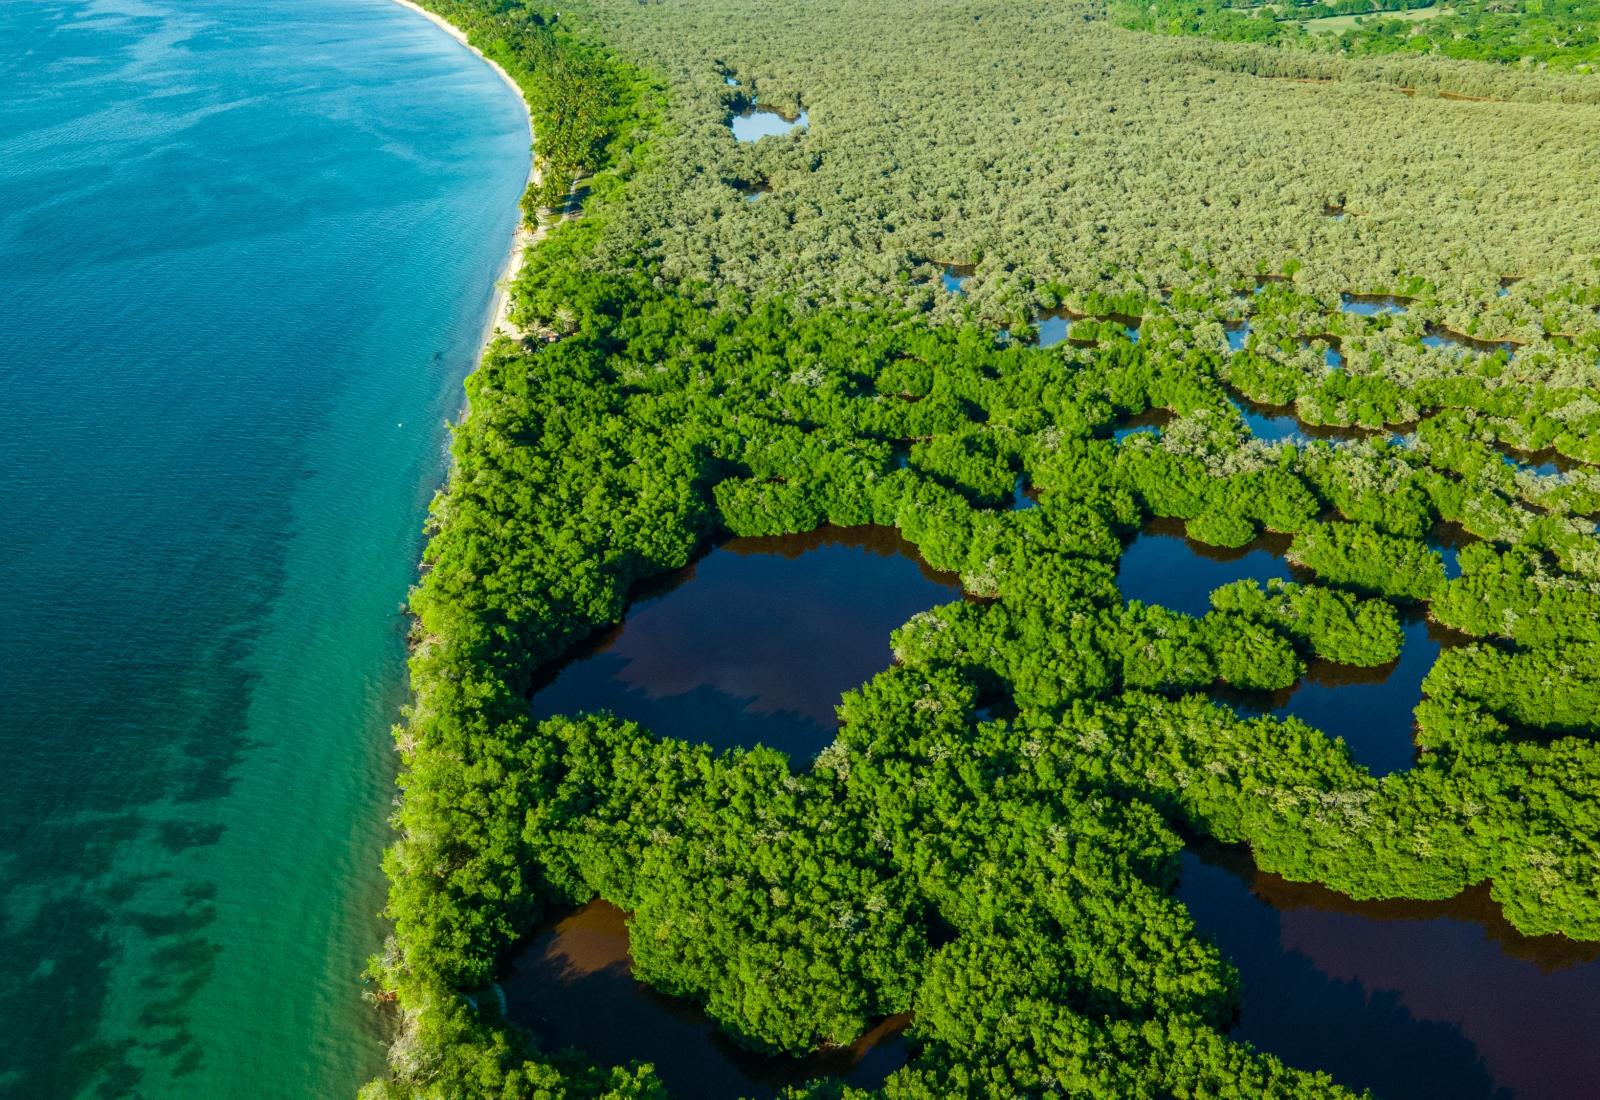 Aerial view of mangrove forests and the Caribbean Sea in Rincon del Mar, Sucre, Colombia